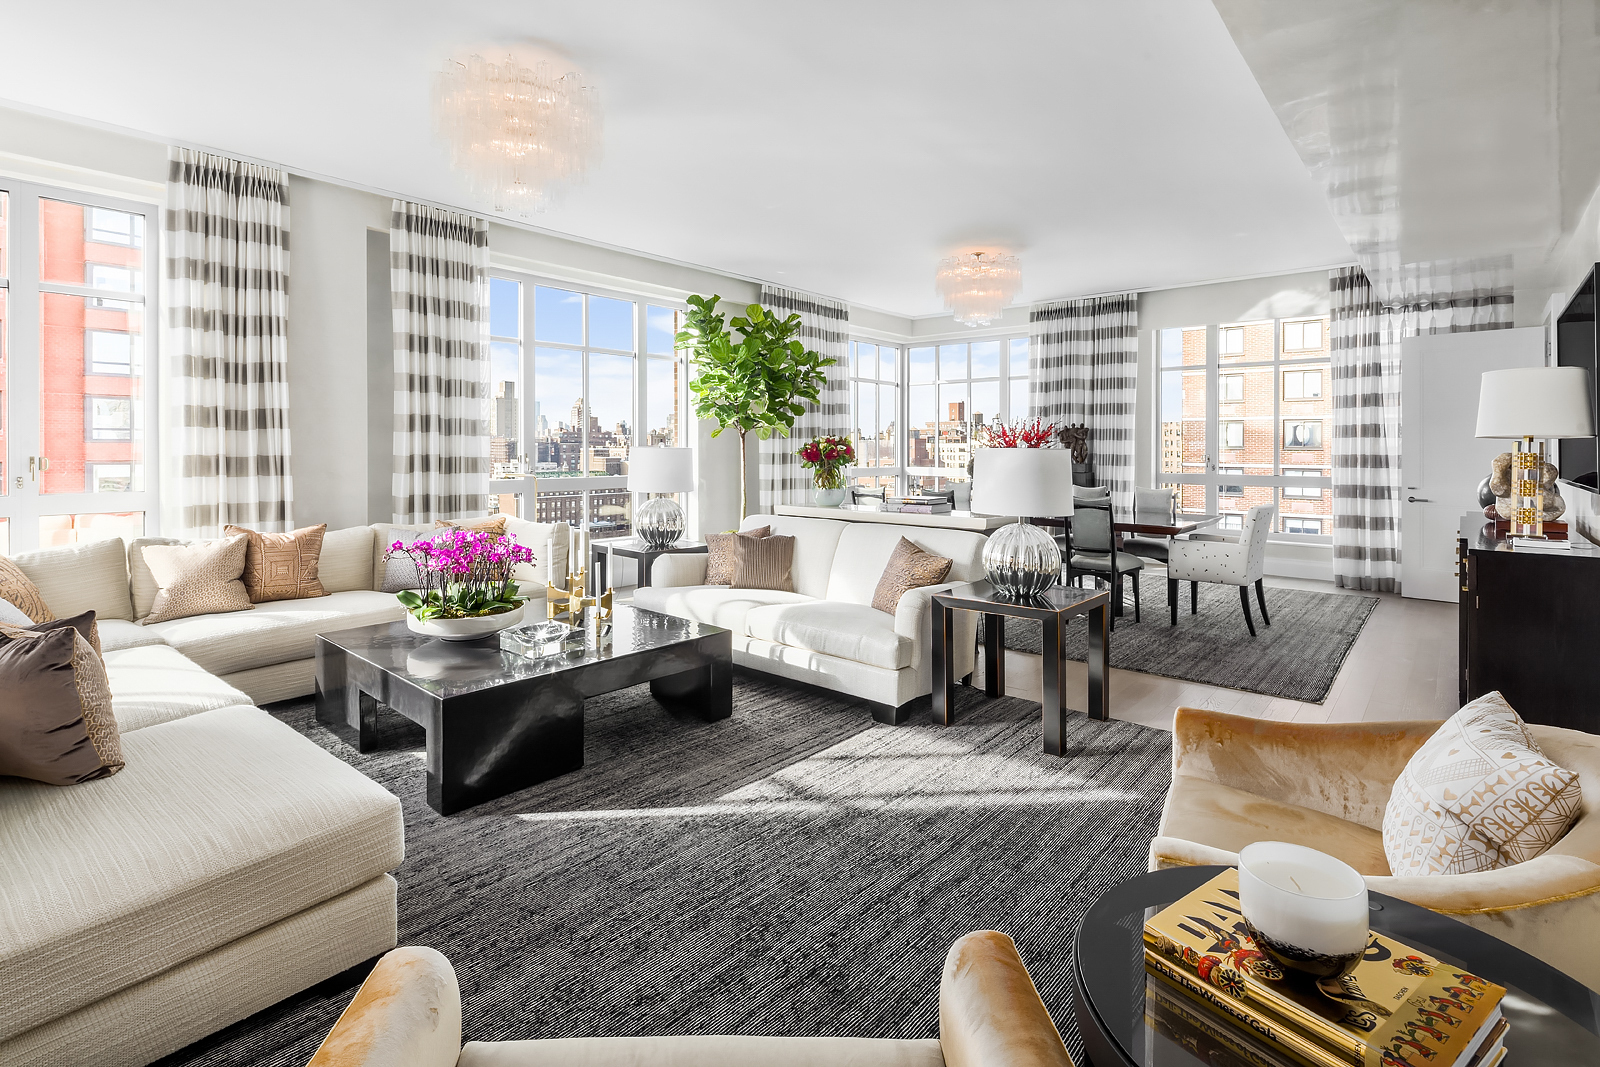 200 East 95th Street 18A, Yorkville, Upper East Side, NYC - 5 Bedrooms  
4.5 Bathrooms  
7 Rooms - 